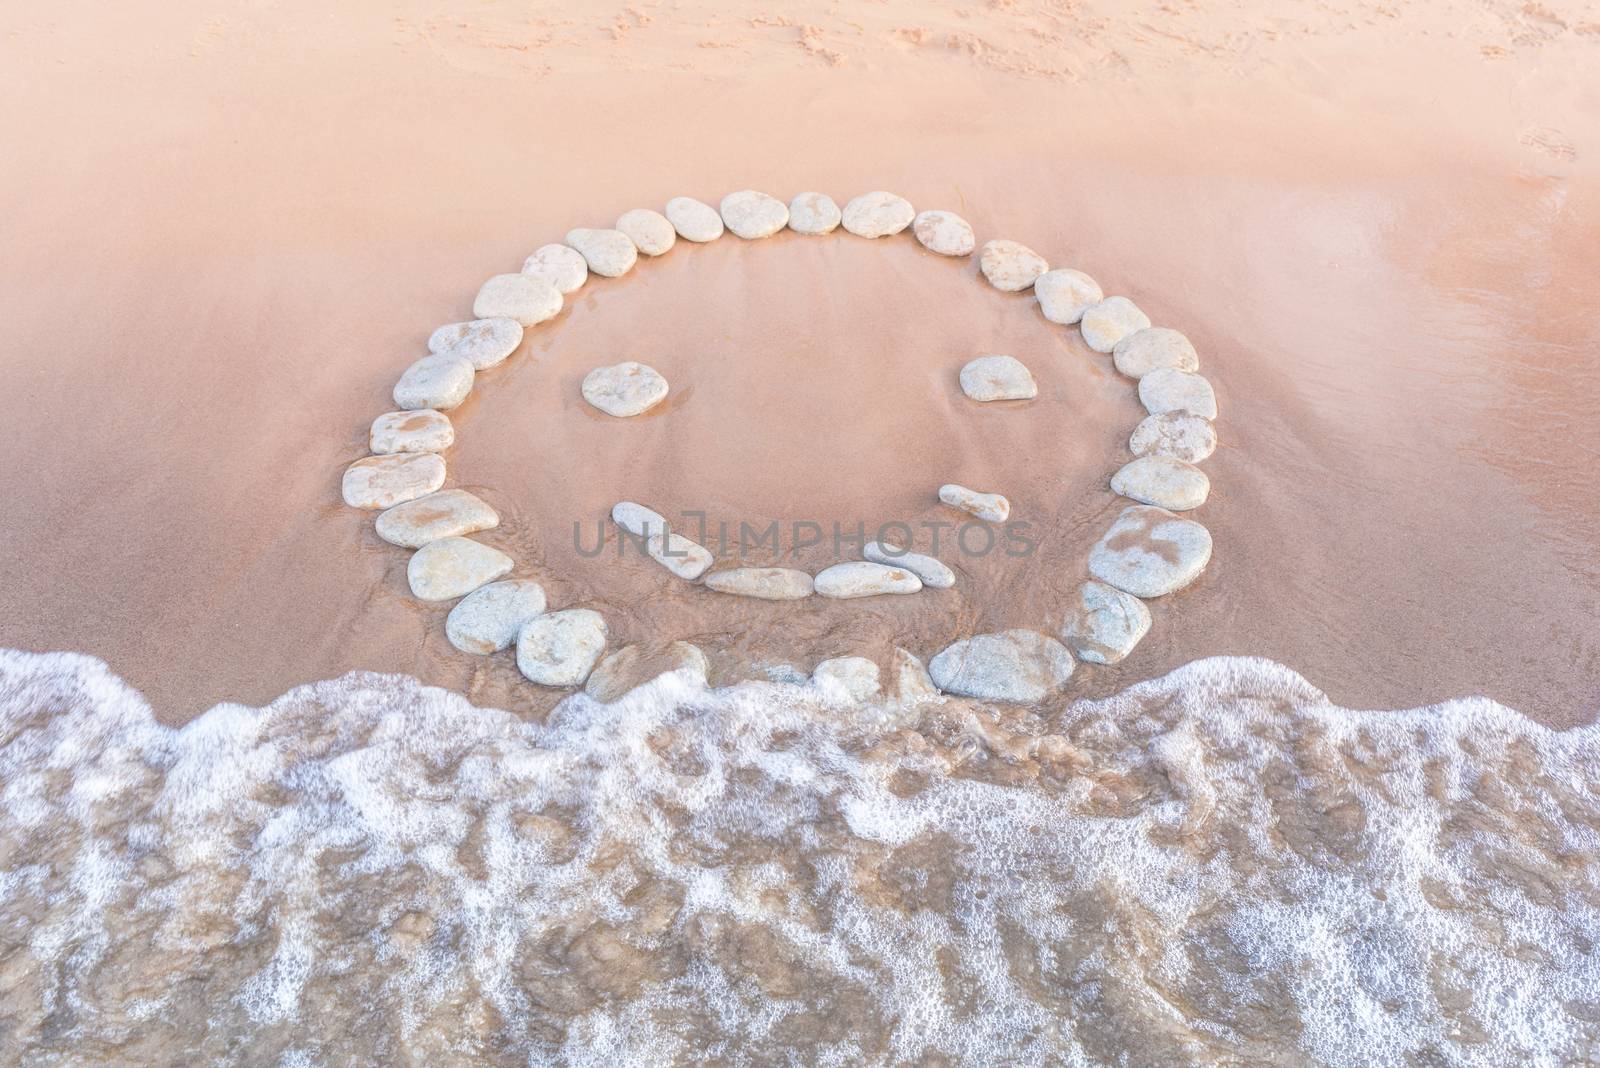 Emoticon of pebbles on sand by styf22